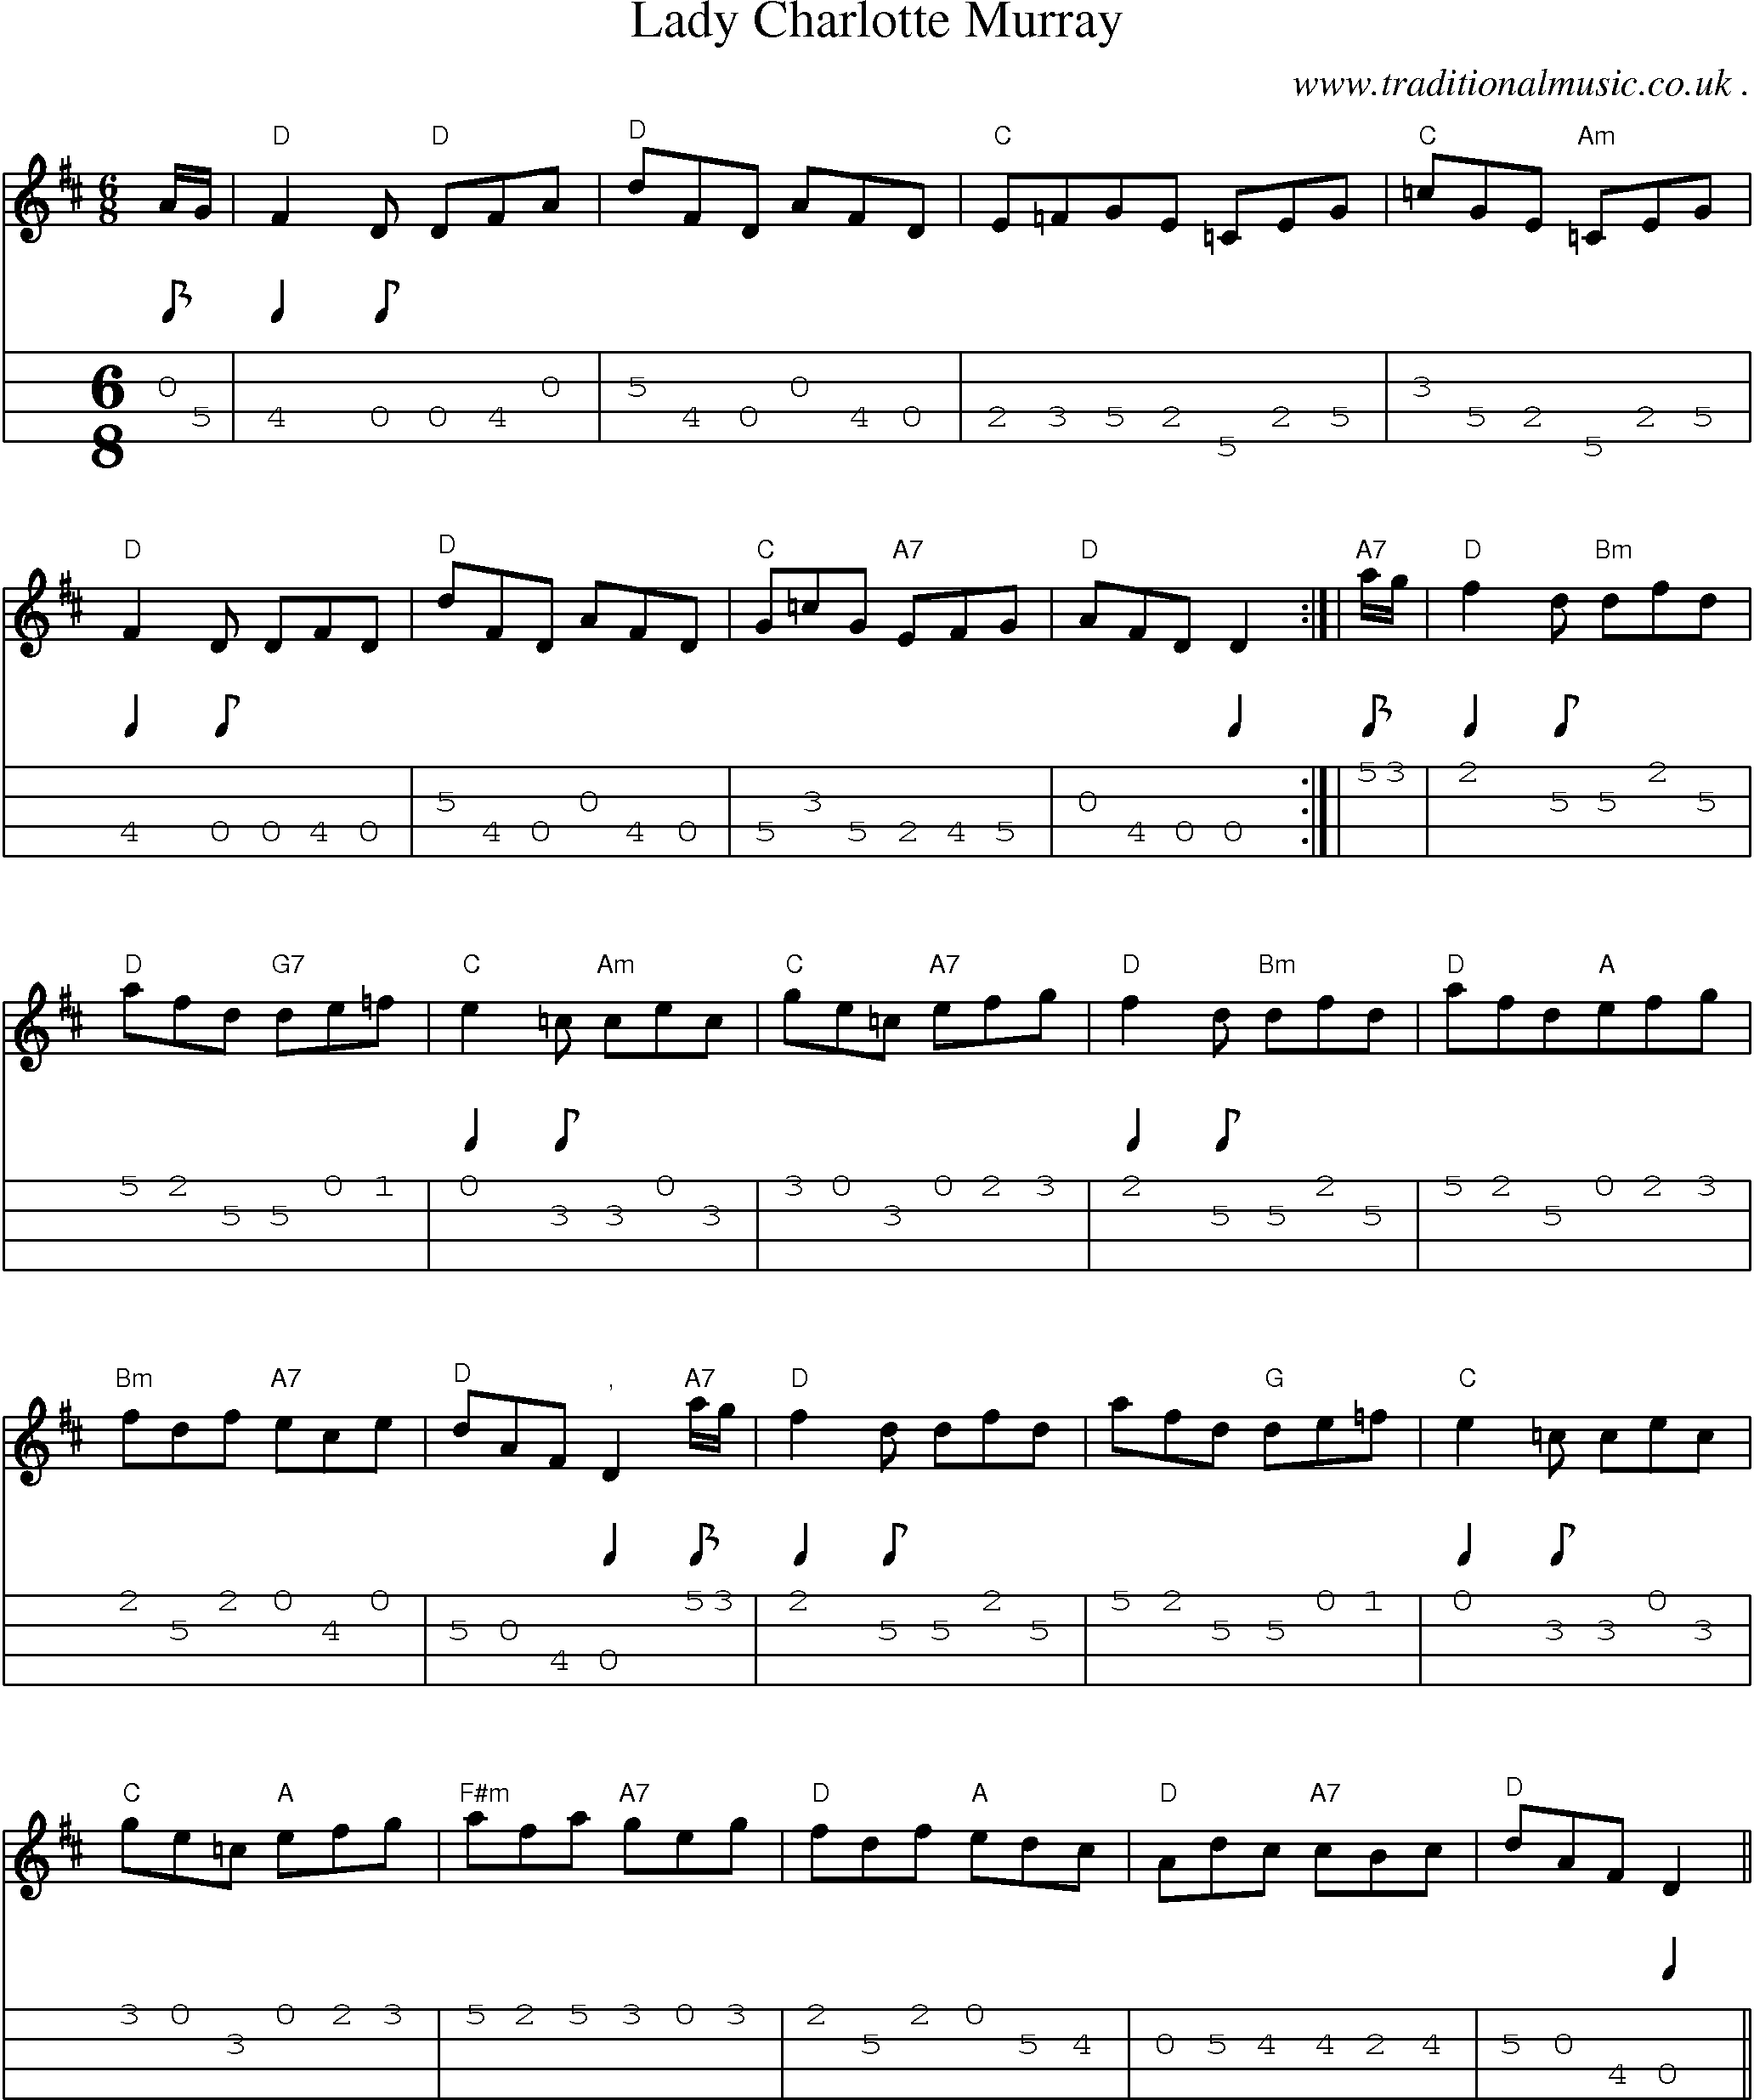 Sheet-music  score, Chords and Mandolin Tabs for Lady Charlotte Murray